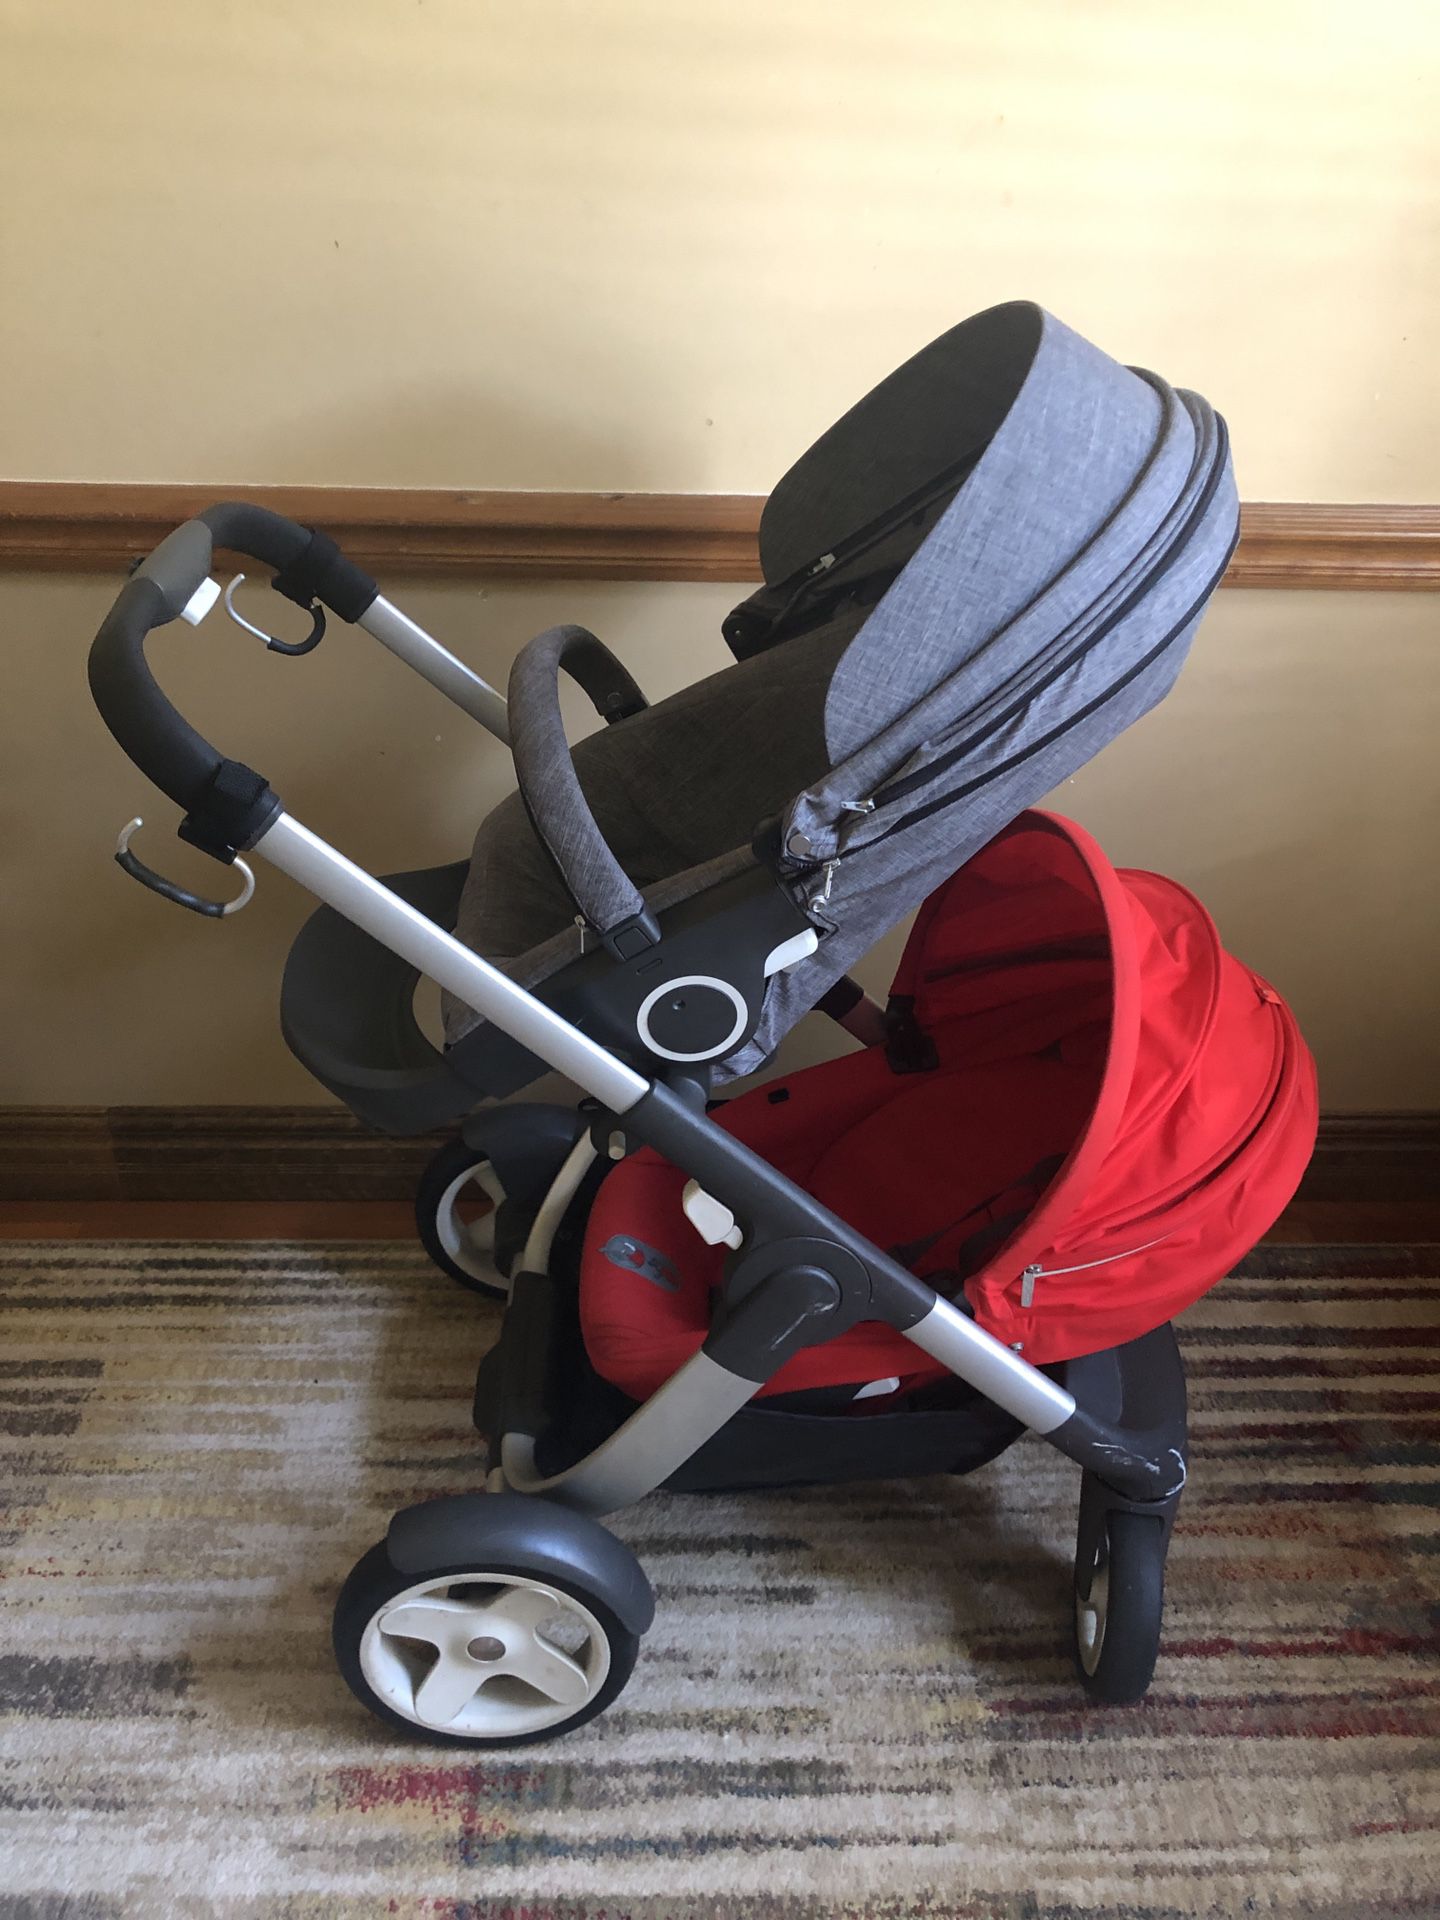 Stokke crusi stroller with car seat and sibling seat